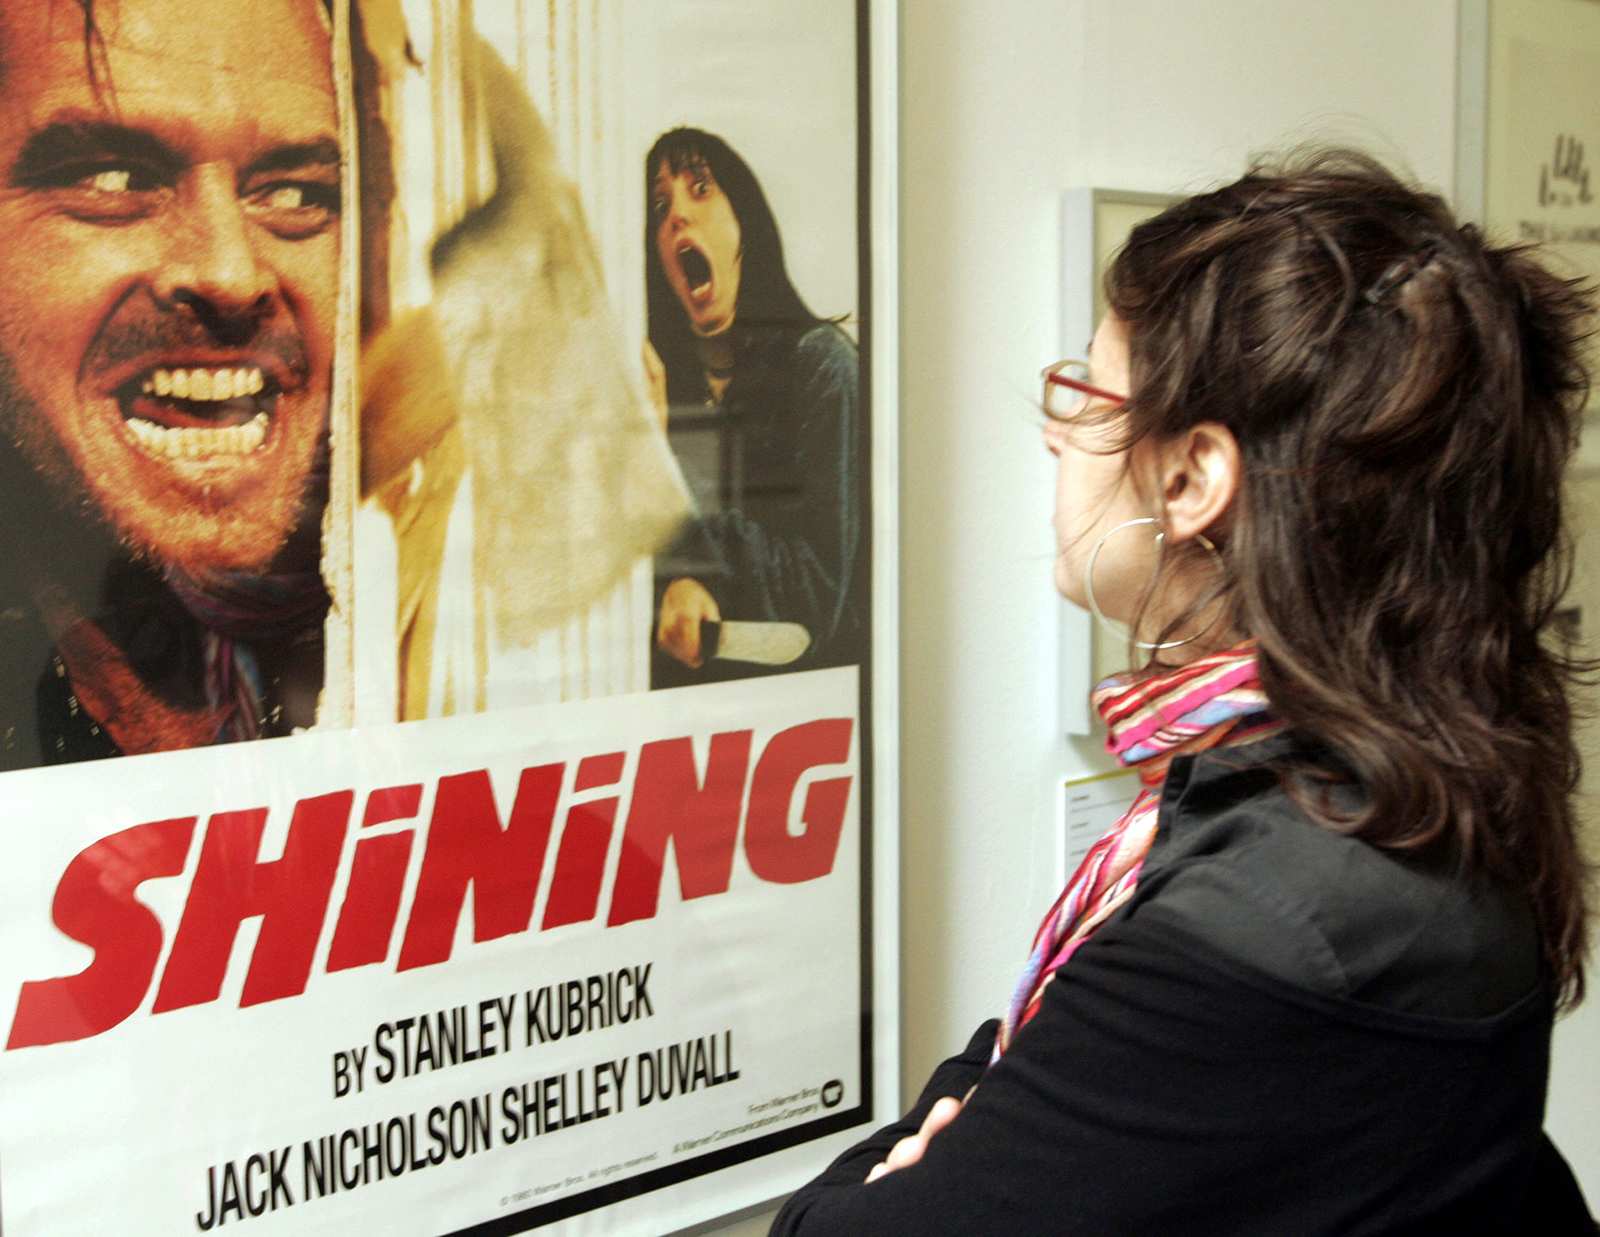 Fire breaks out at Oregon hotel featured in ‘The Shining’